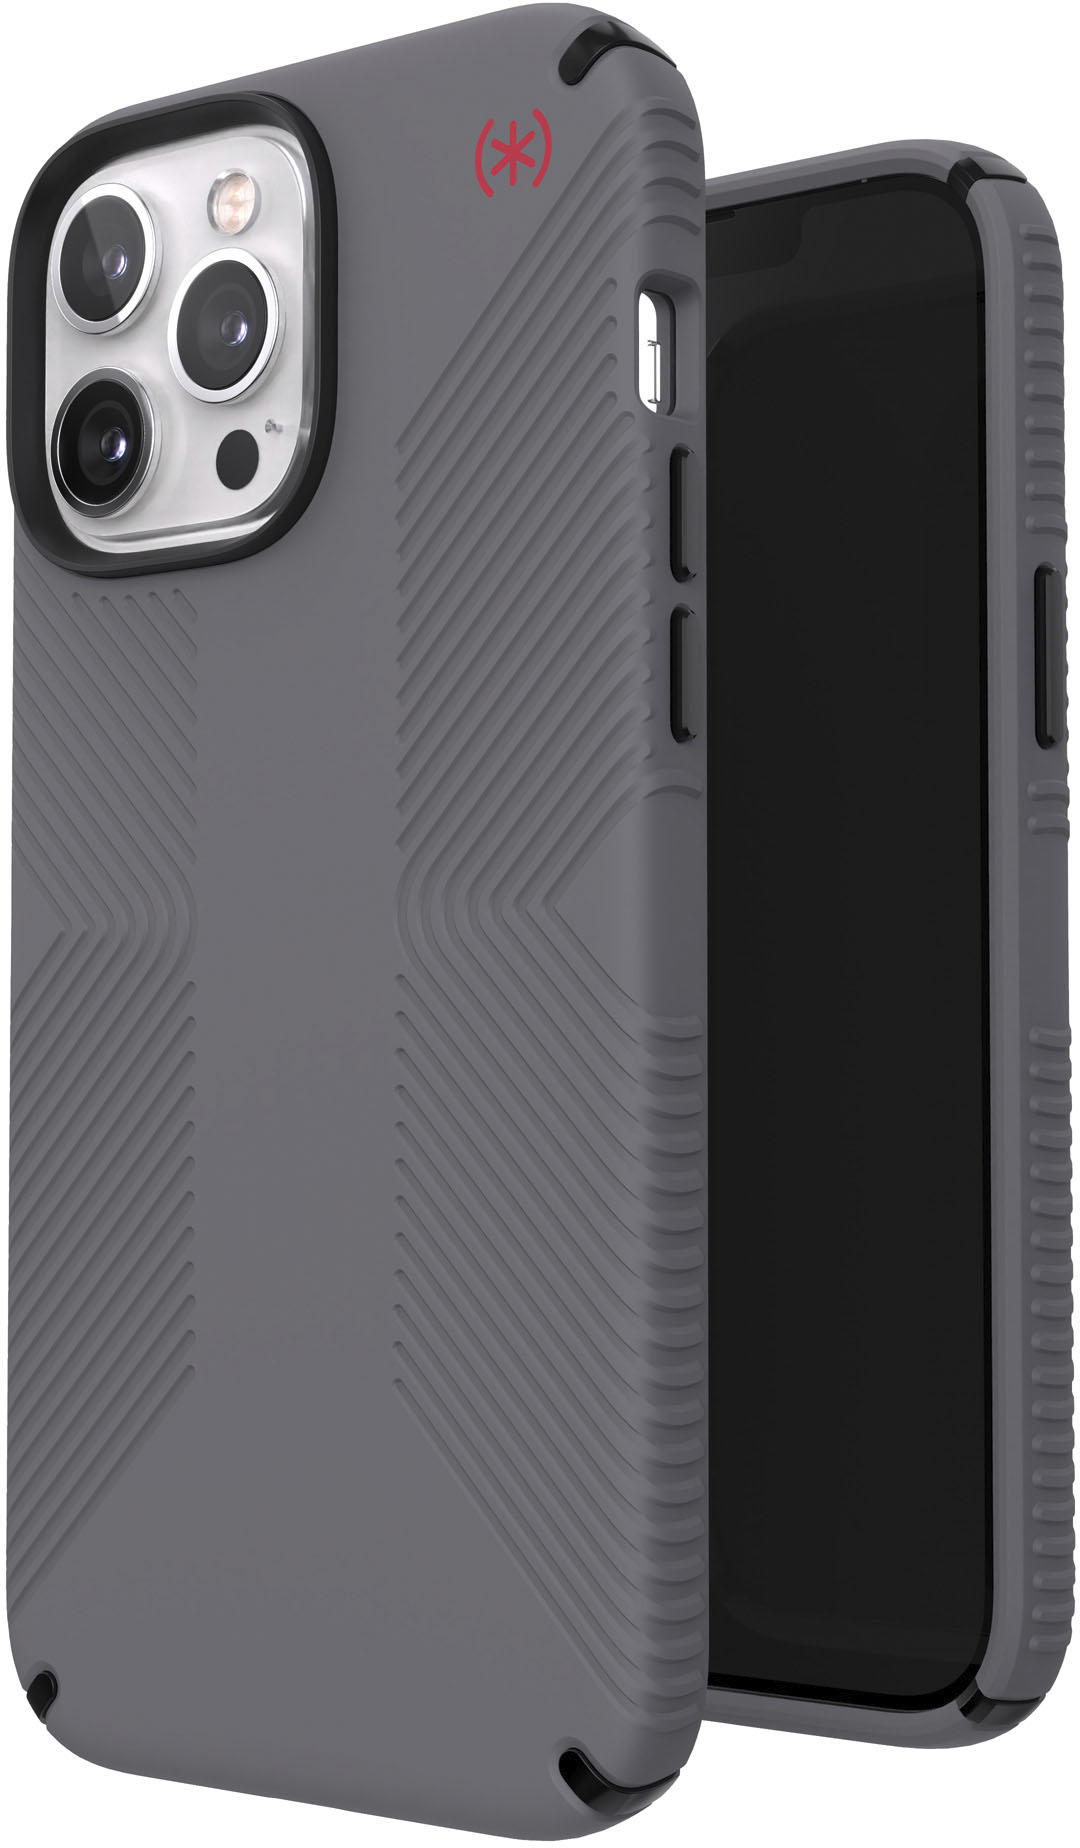 Angle View: Raptic - Shield Pro Case for iPhone 12 Pro Max - Iridescent